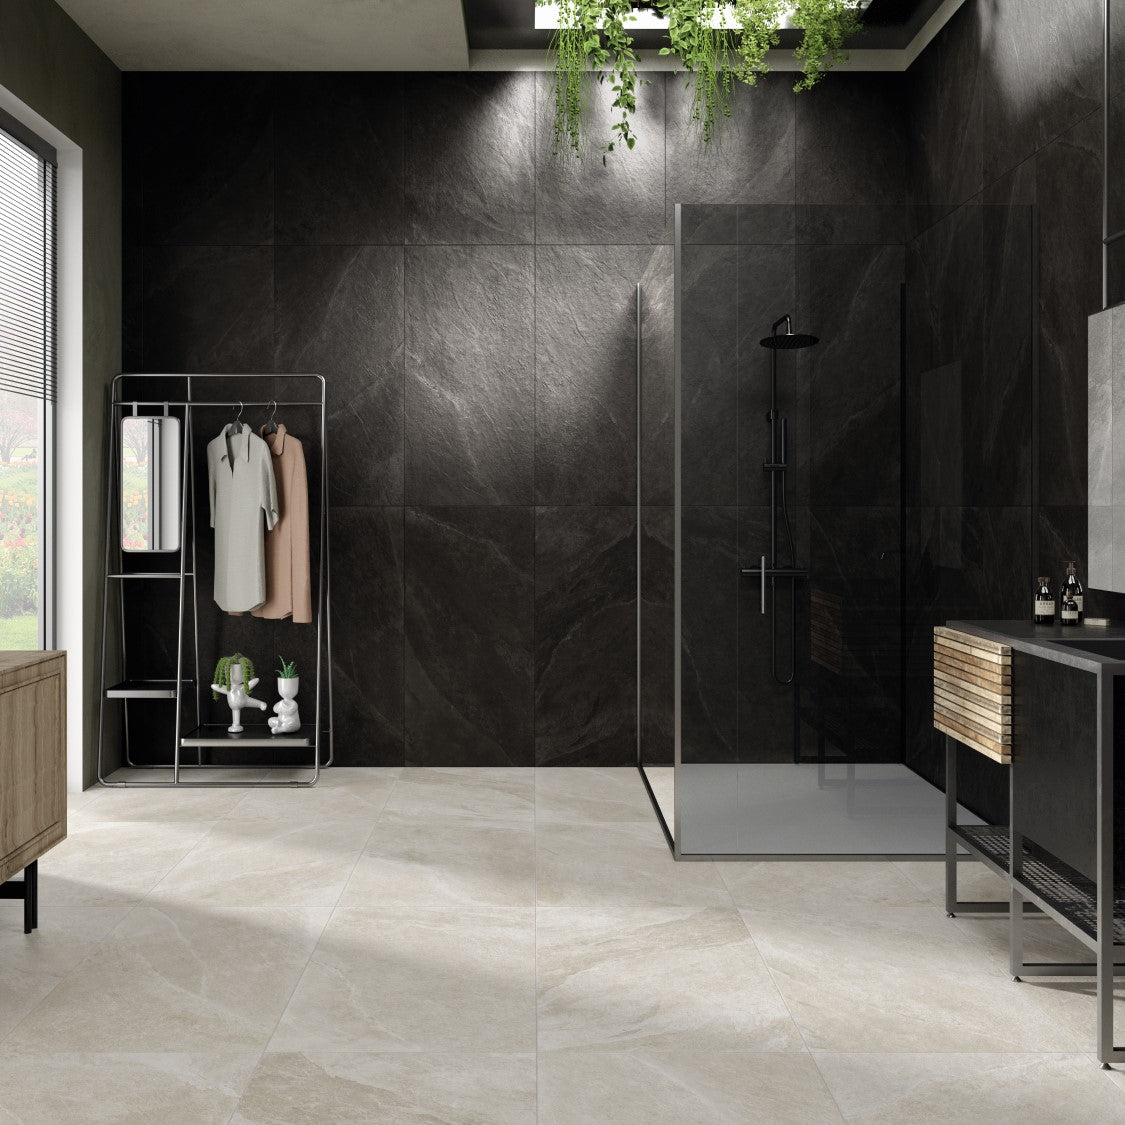 Wales Salle de bain Anthracite / Wales Bathroom Anthracite